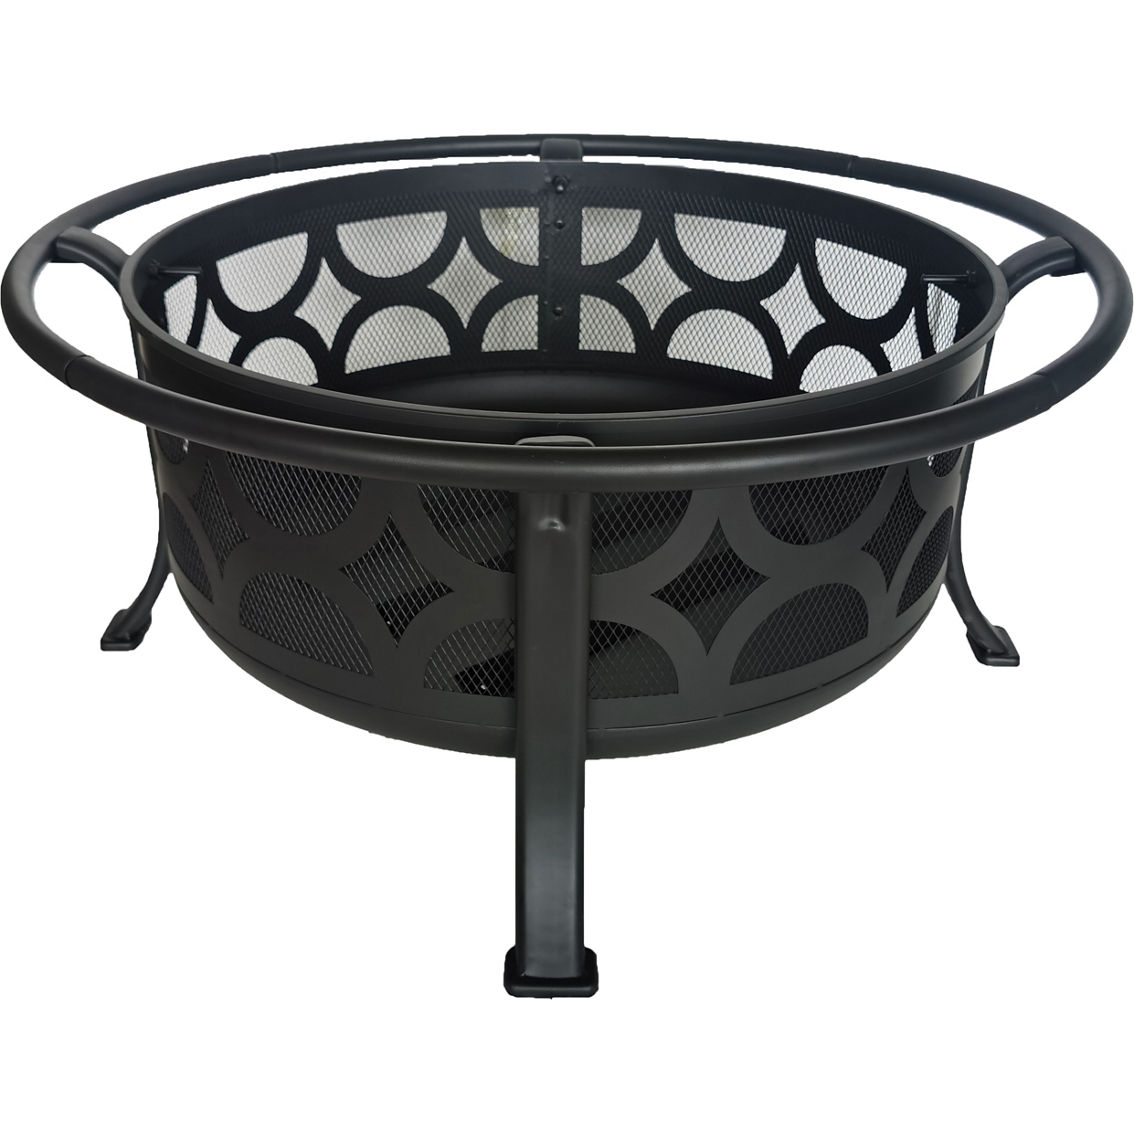 Chard 36 in. Round Steel Fire Pit with Spark Screen - Image 2 of 3